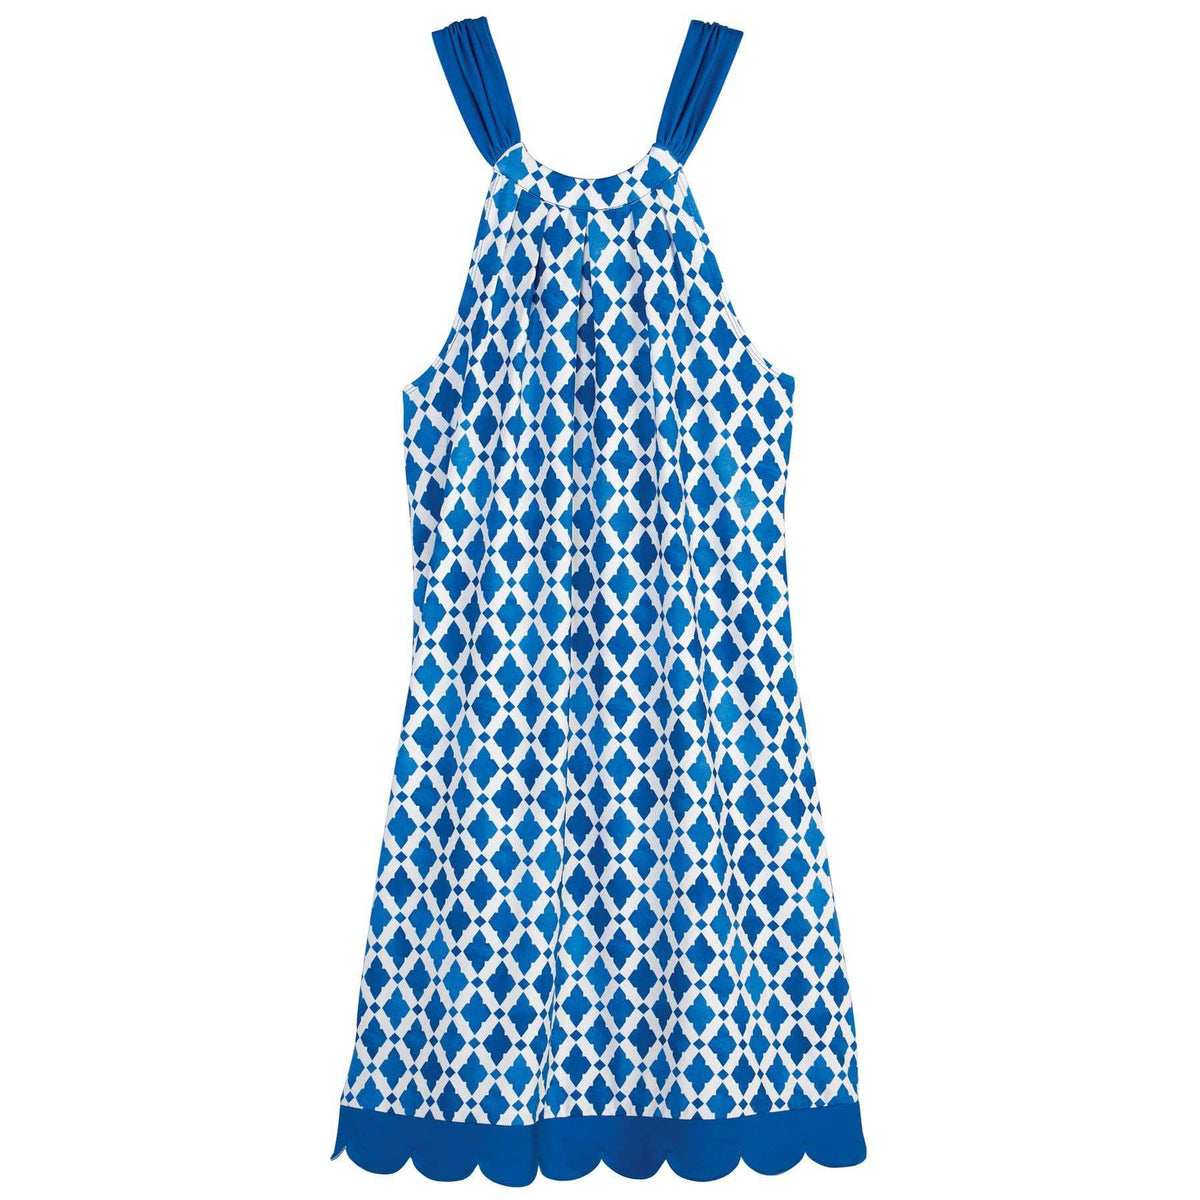 The Natalie Bow Tie dress in Blue Tile by Mud Pie - Country Club Prep